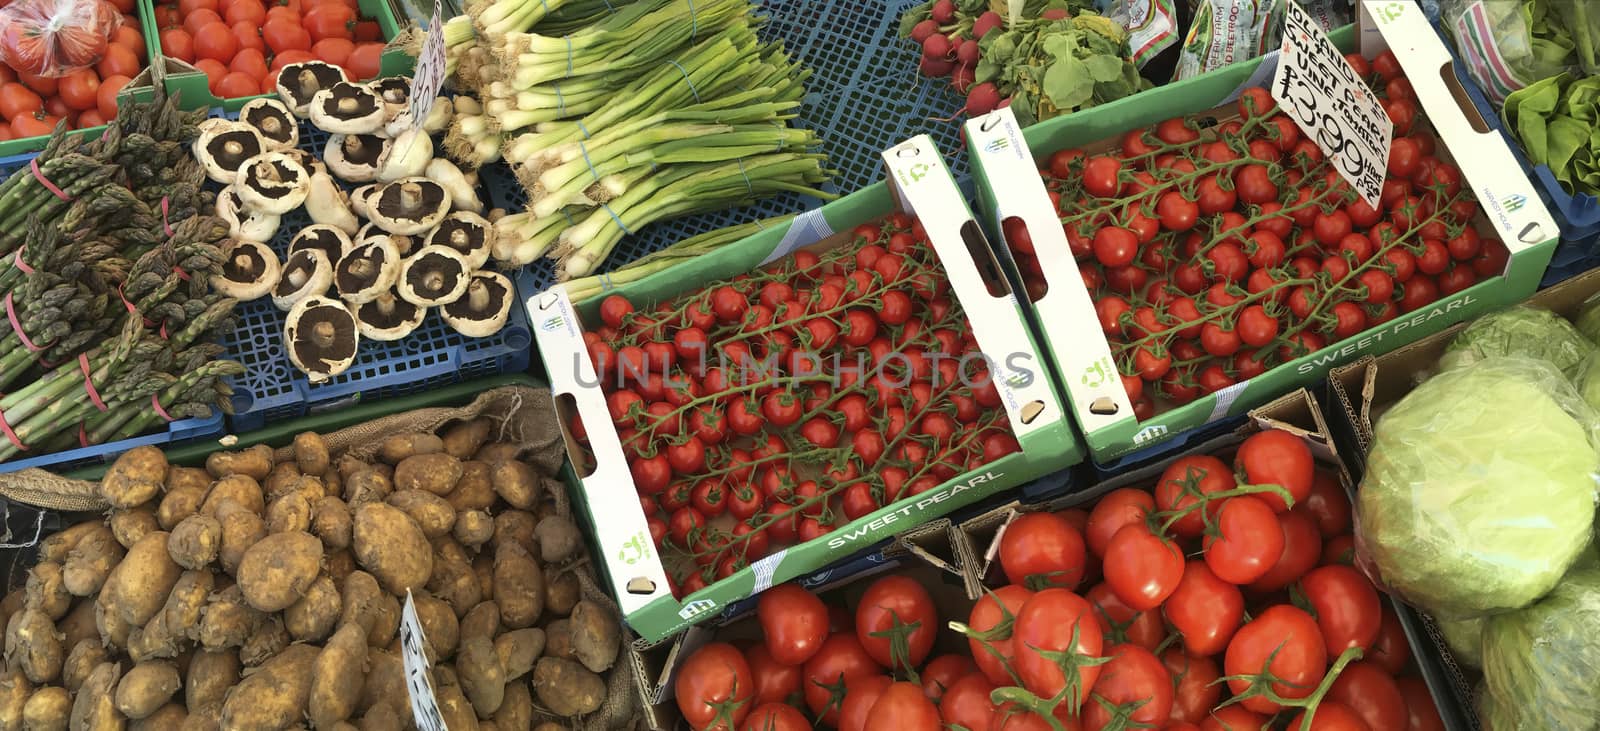 Fresh vegetables on a market stall in York - England